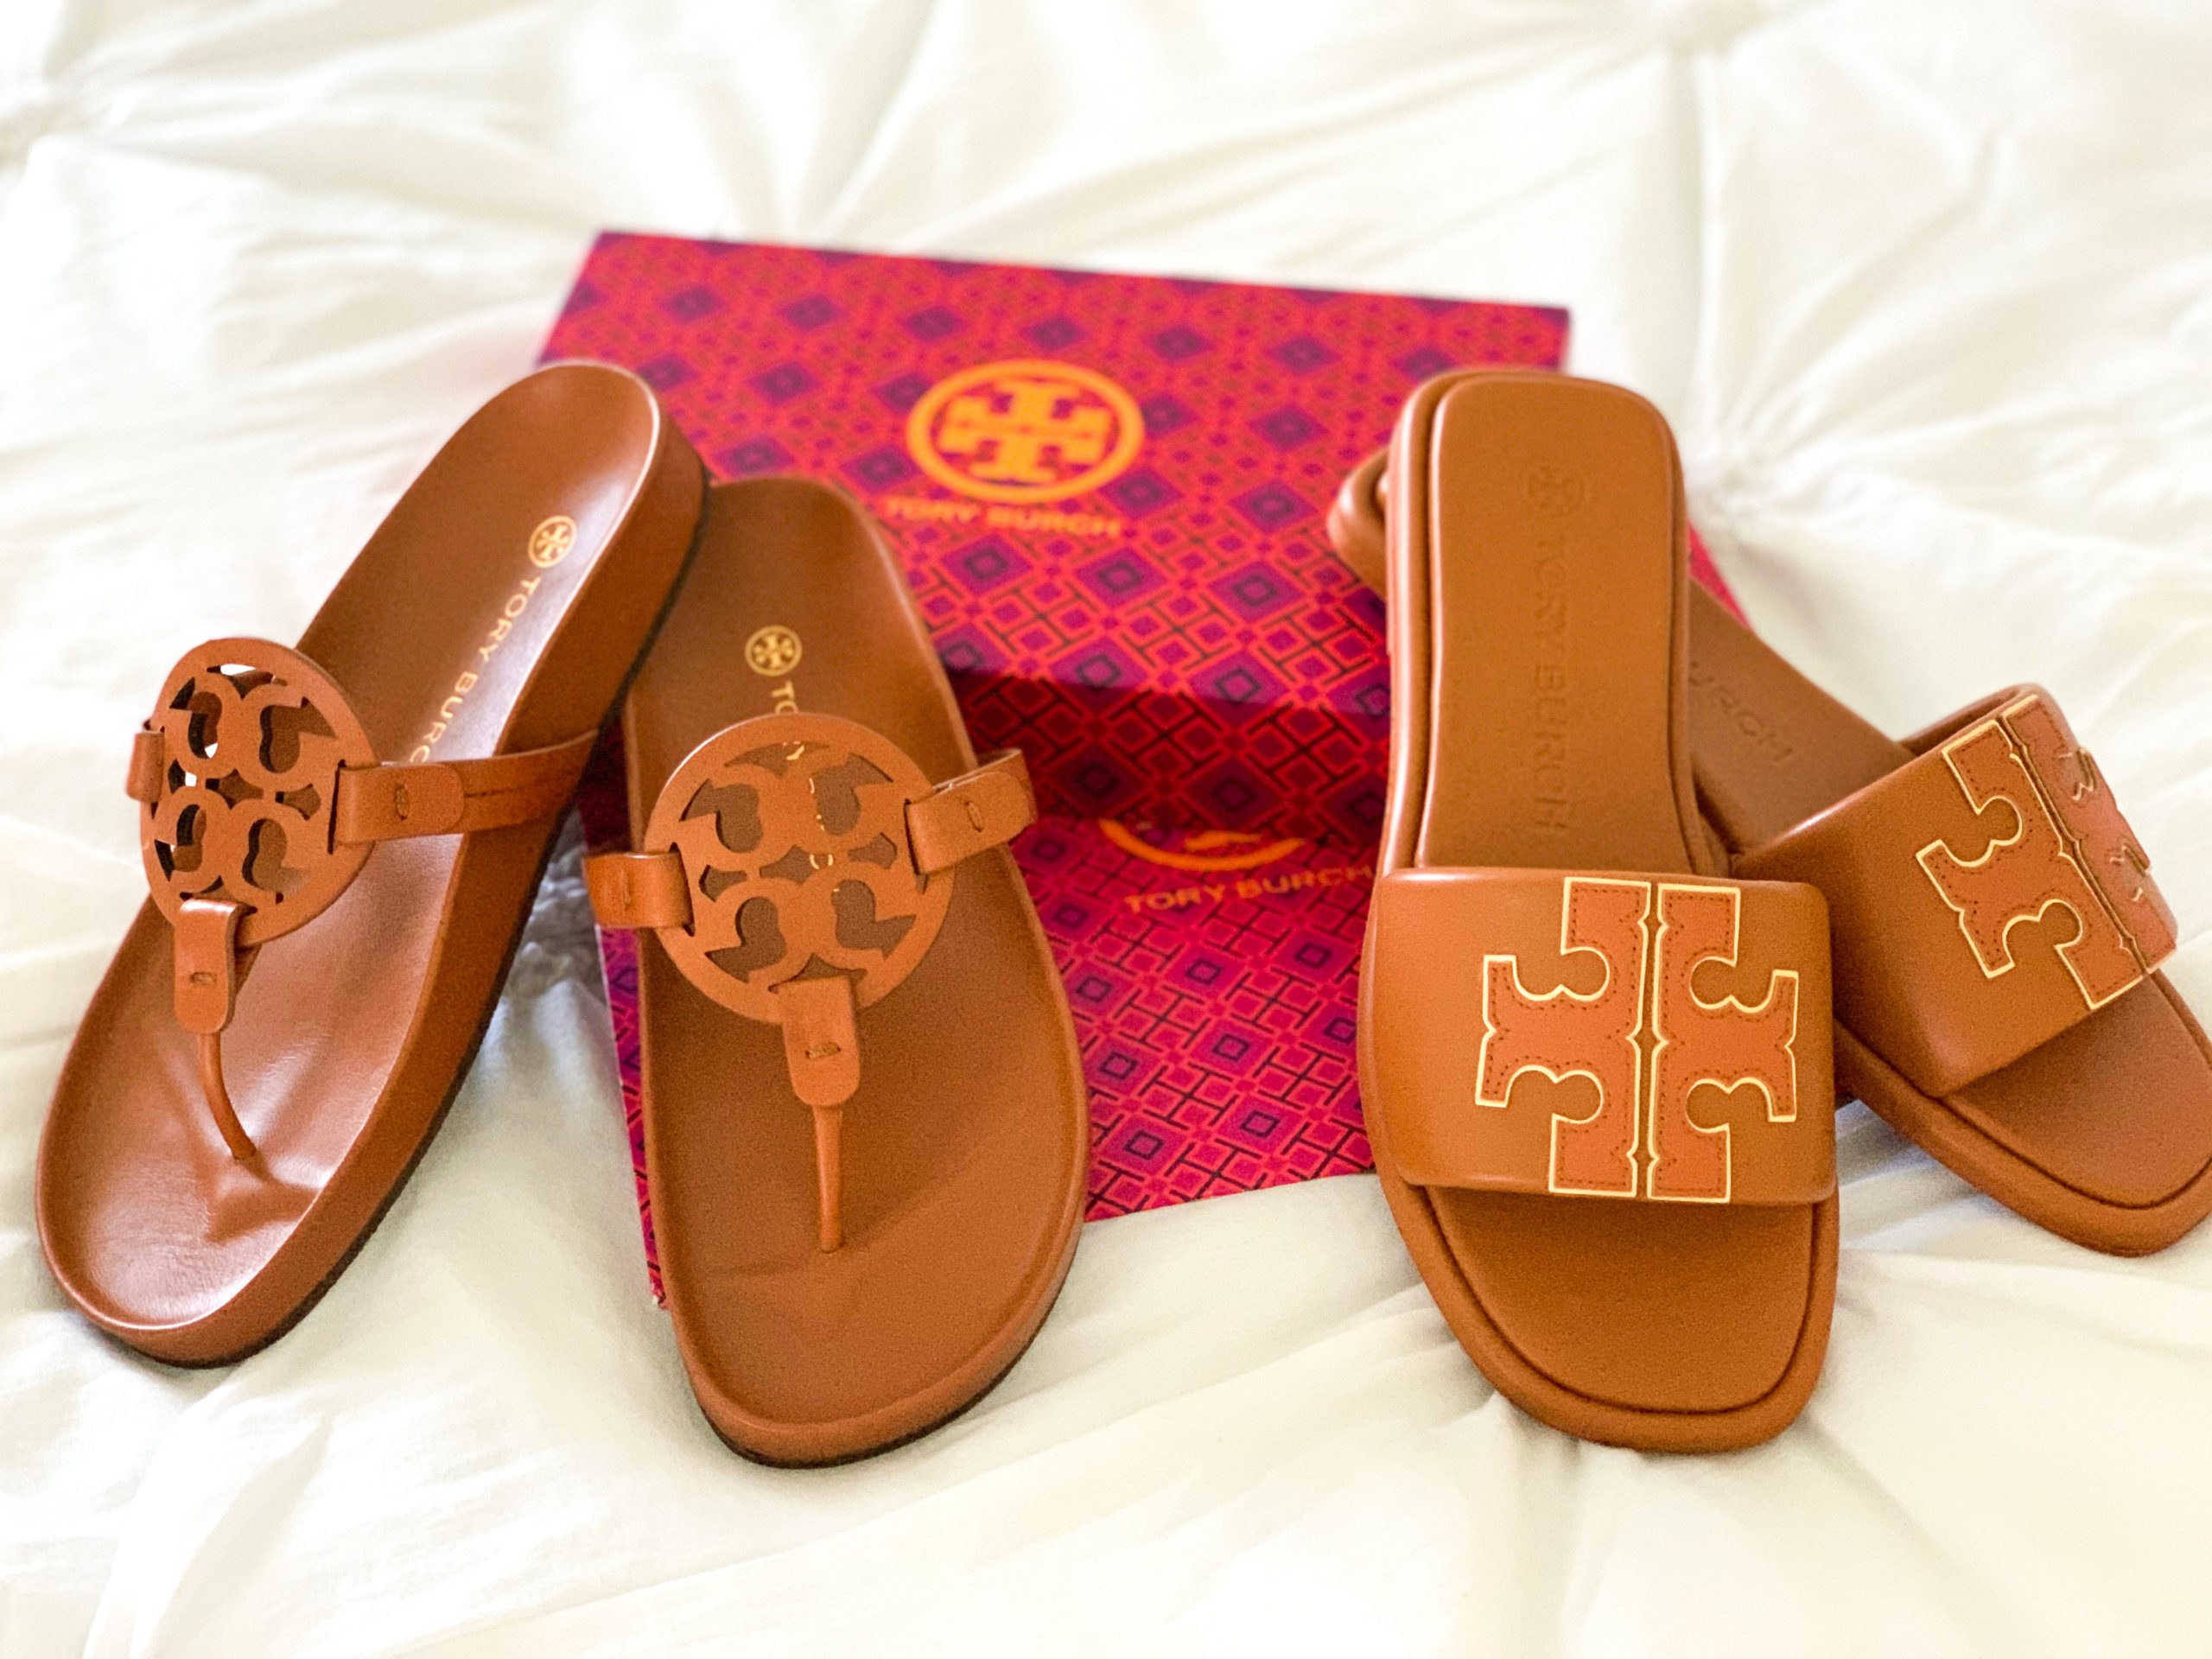 Tory Burch's Black Friday Sale Goes Up to 50% Off